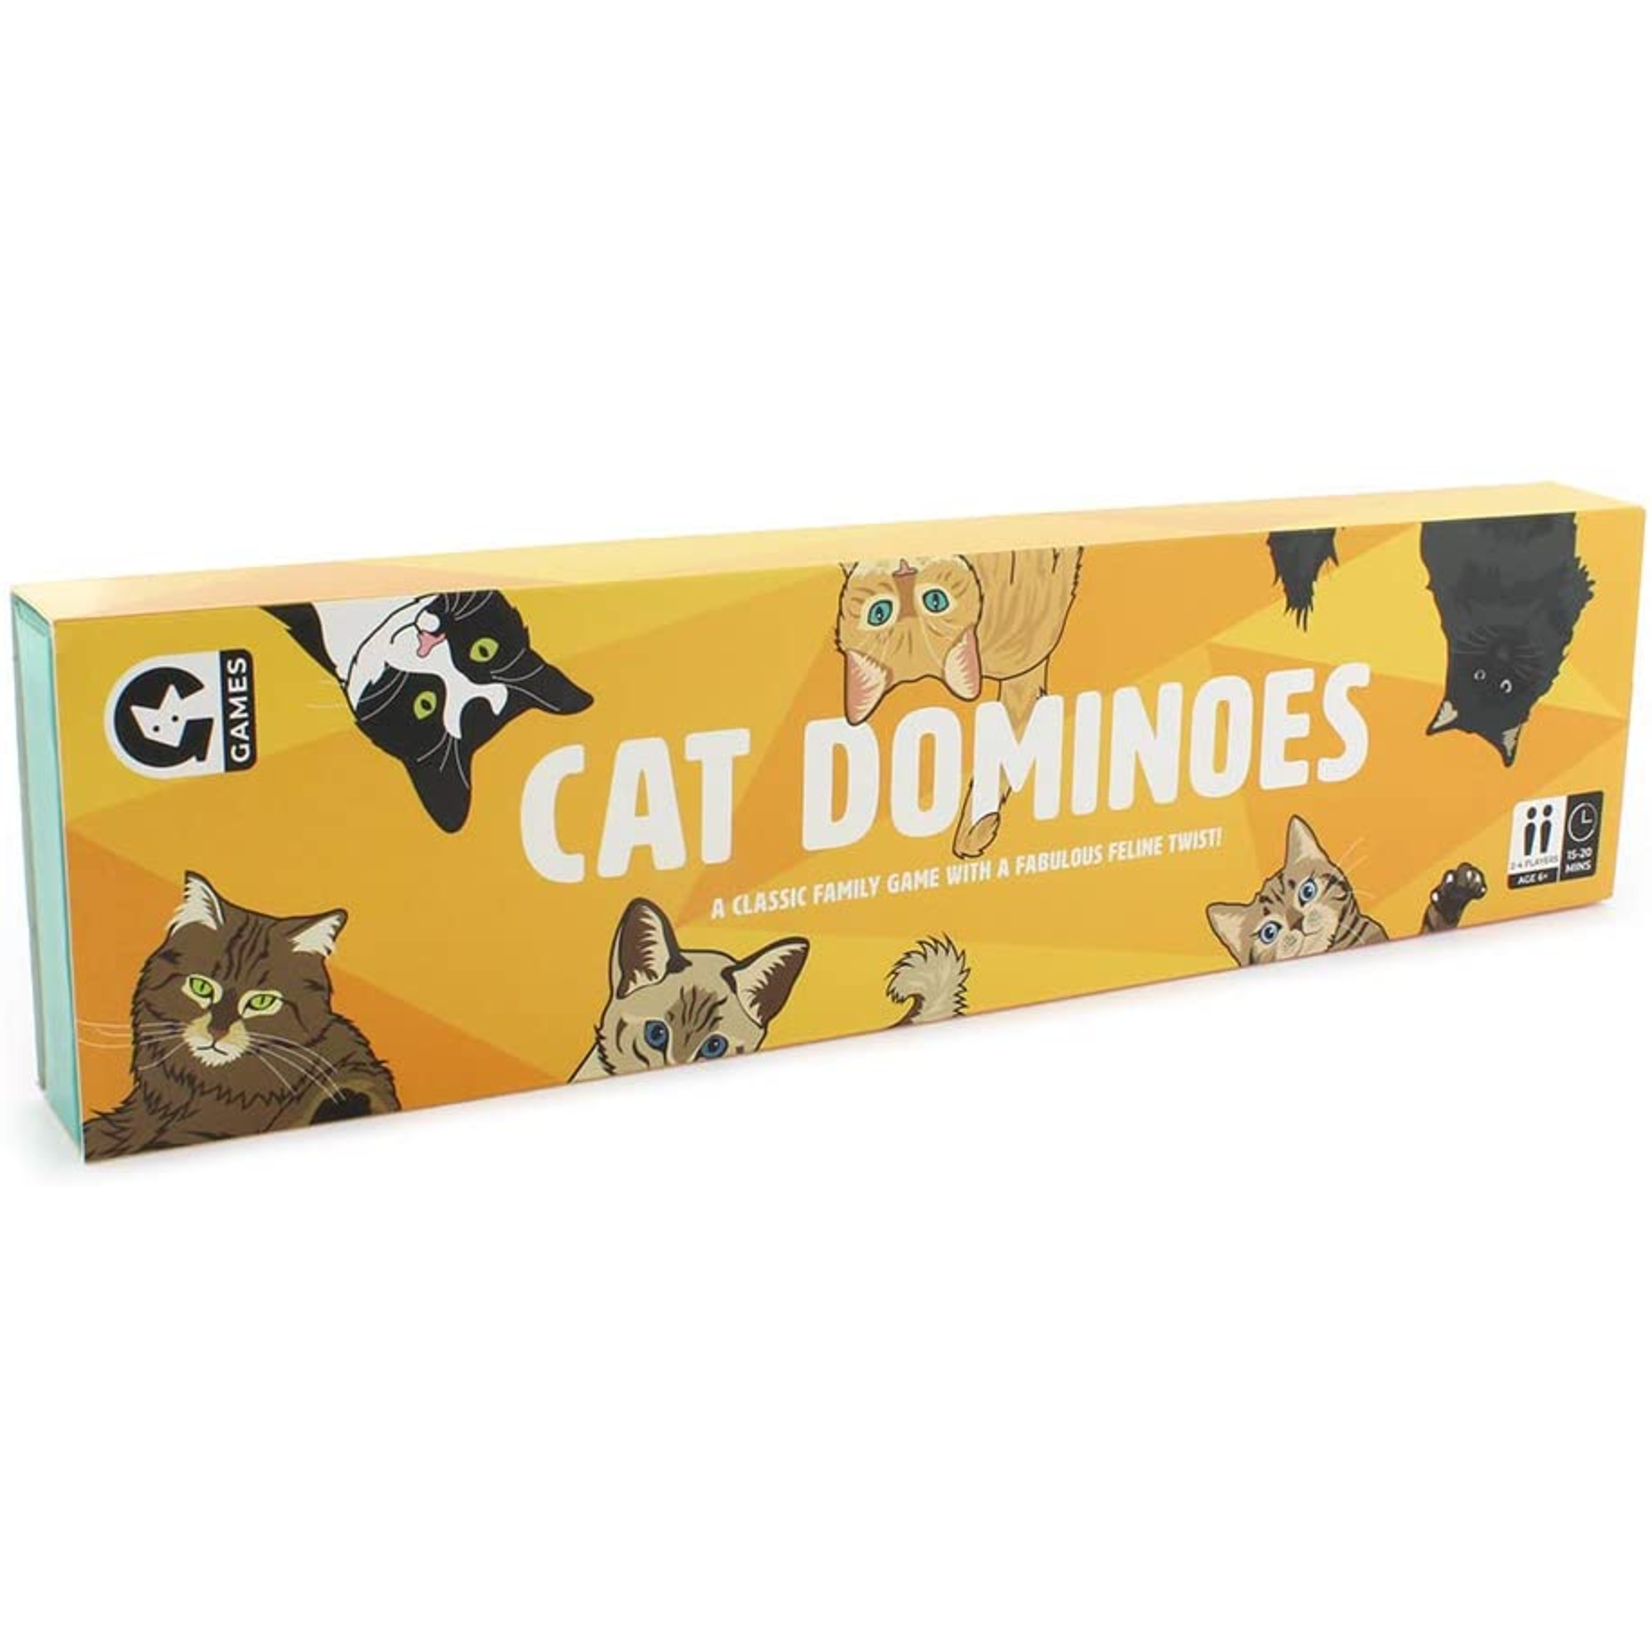 Ginger Fox Cat Dominoes: A Classic Family Game with a Fabulous Feline Twist